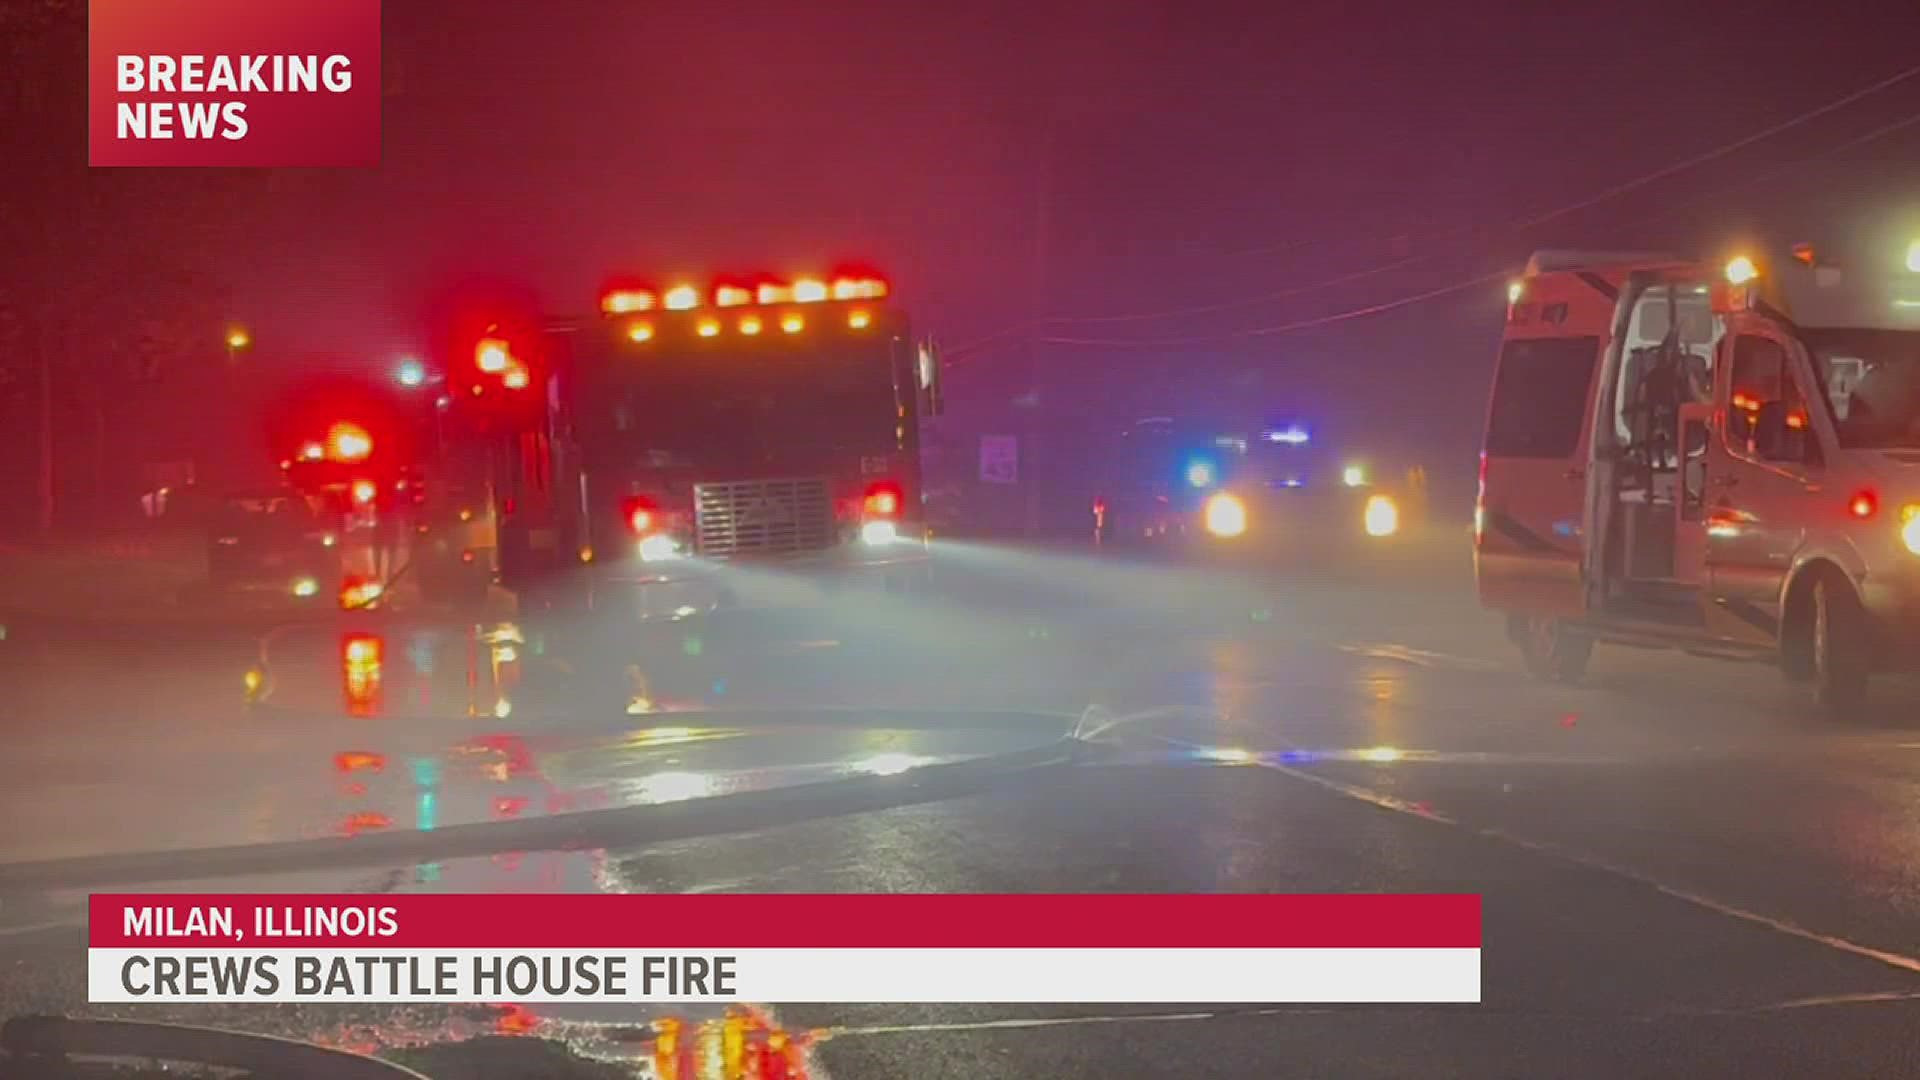 Crews respond to home engulfed in flames in Milan, Illinois